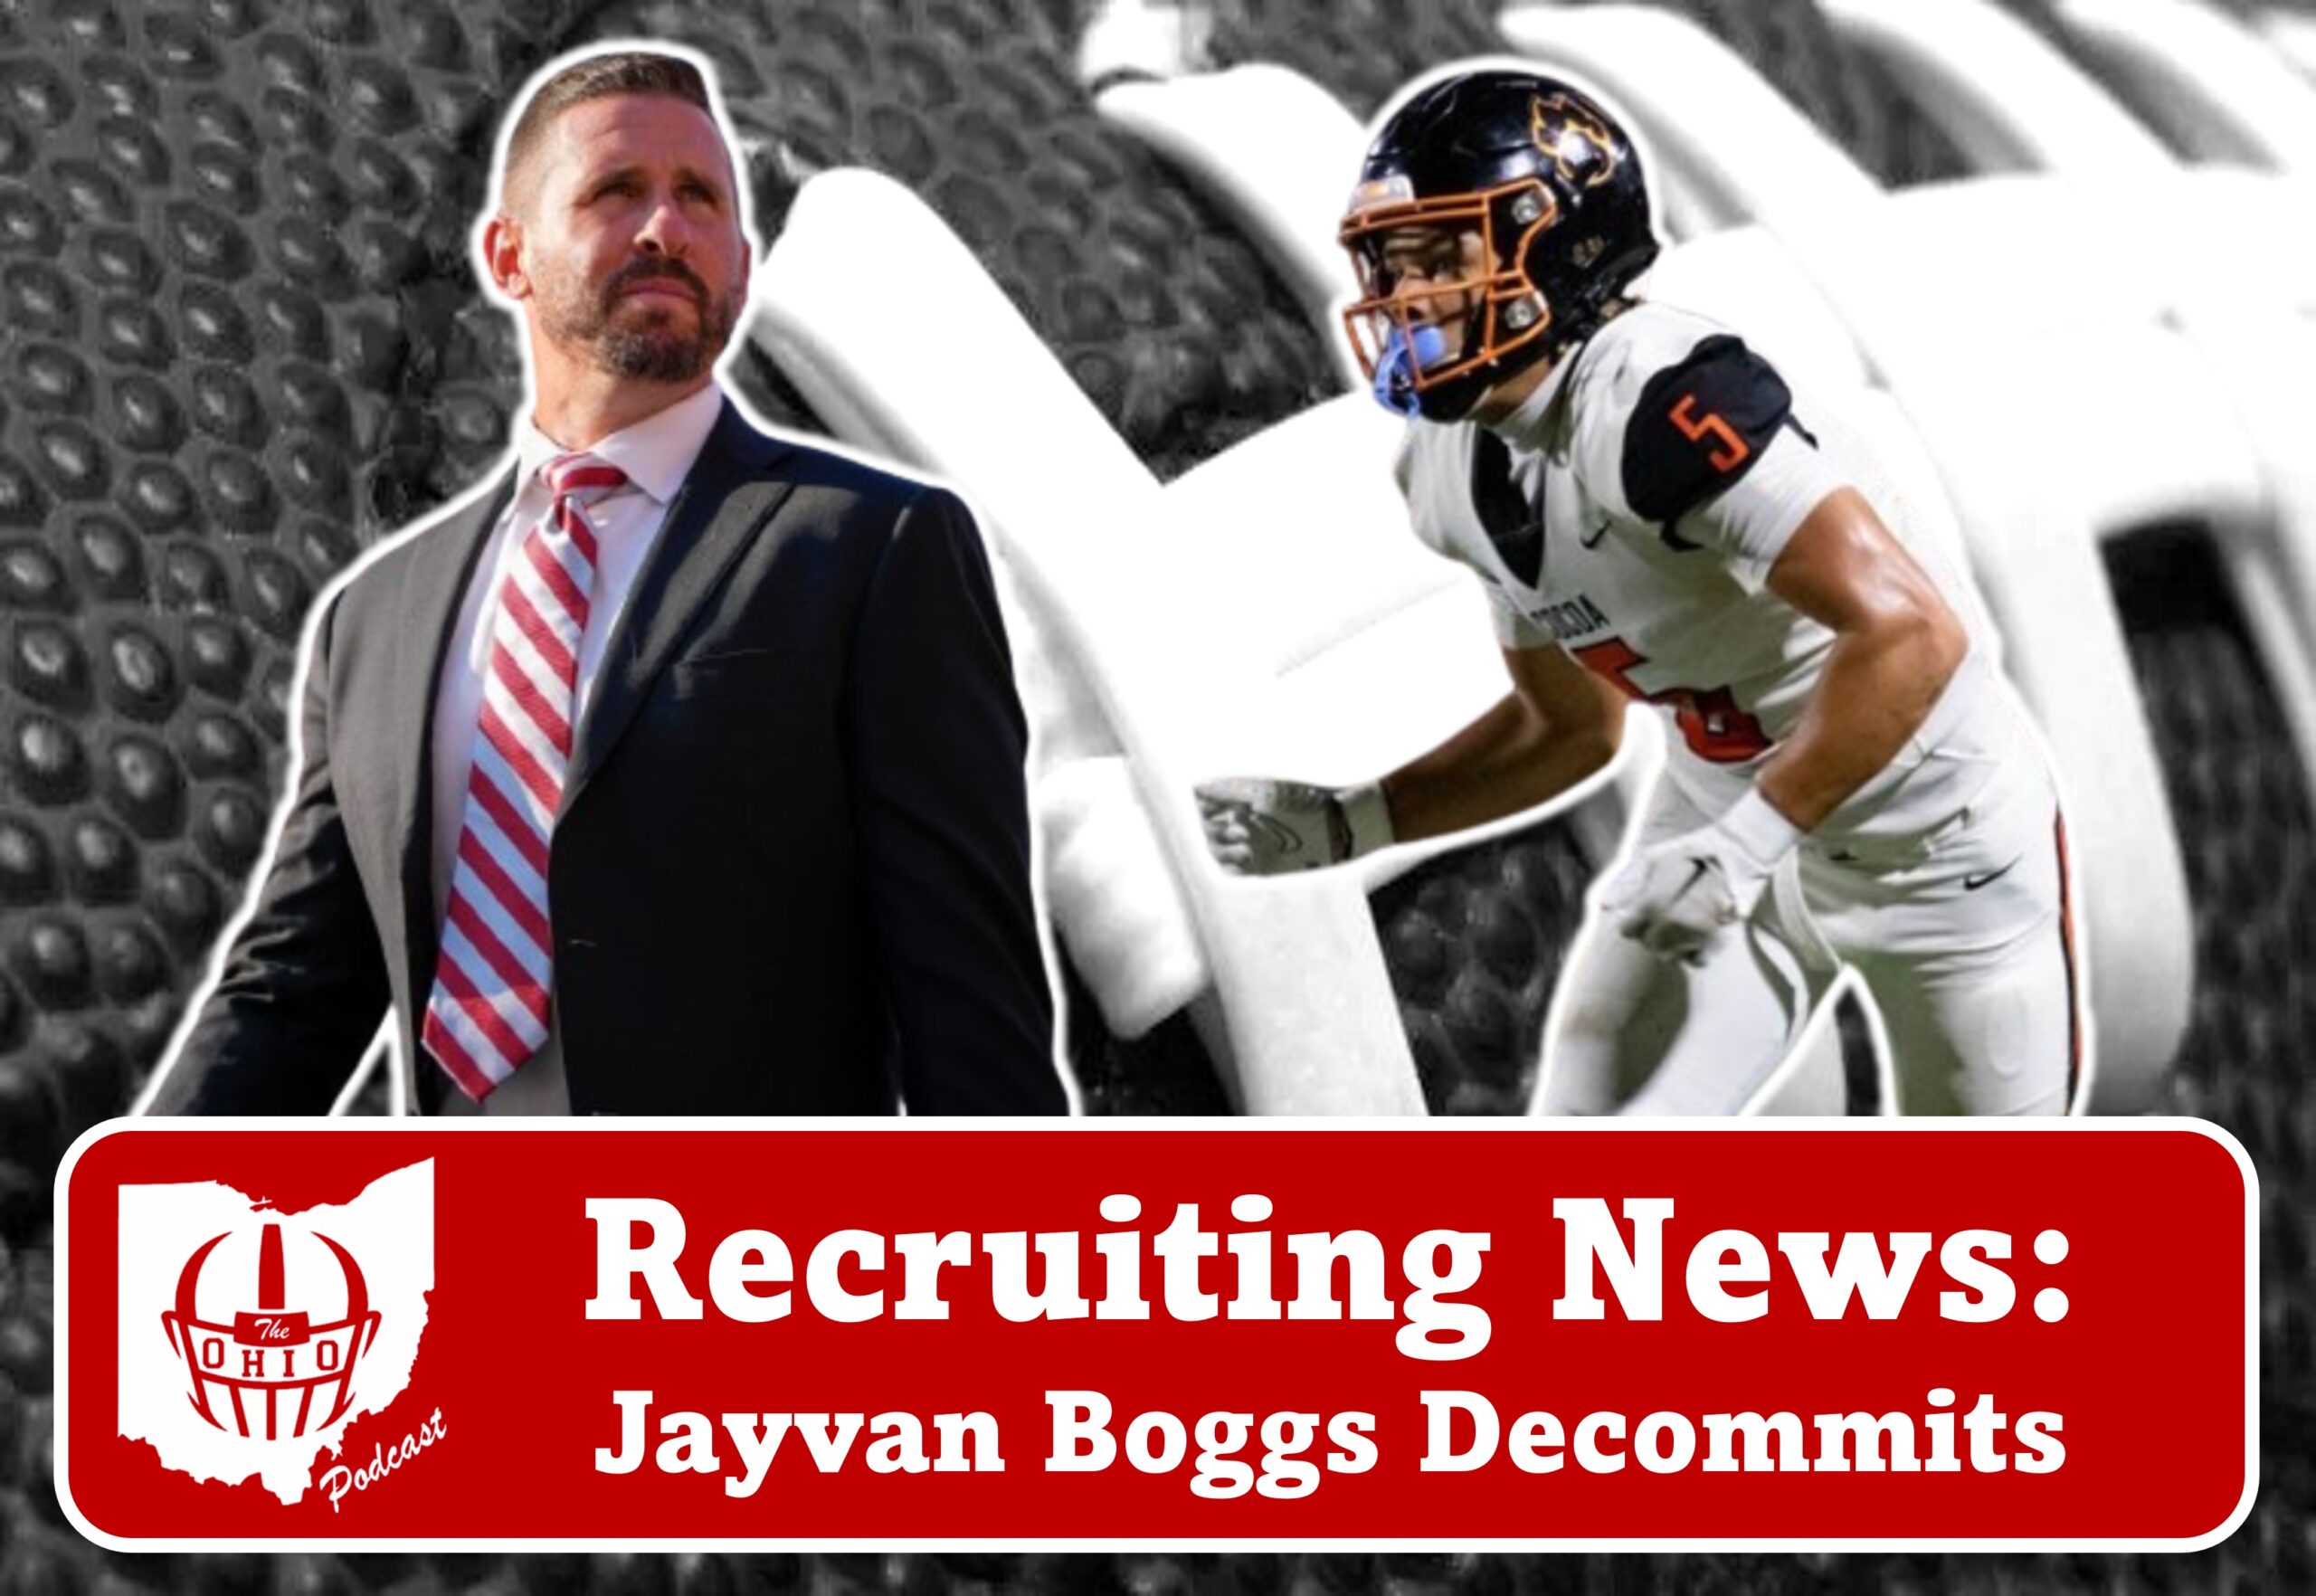 Jayvan Boggs Decommits from Ohio State